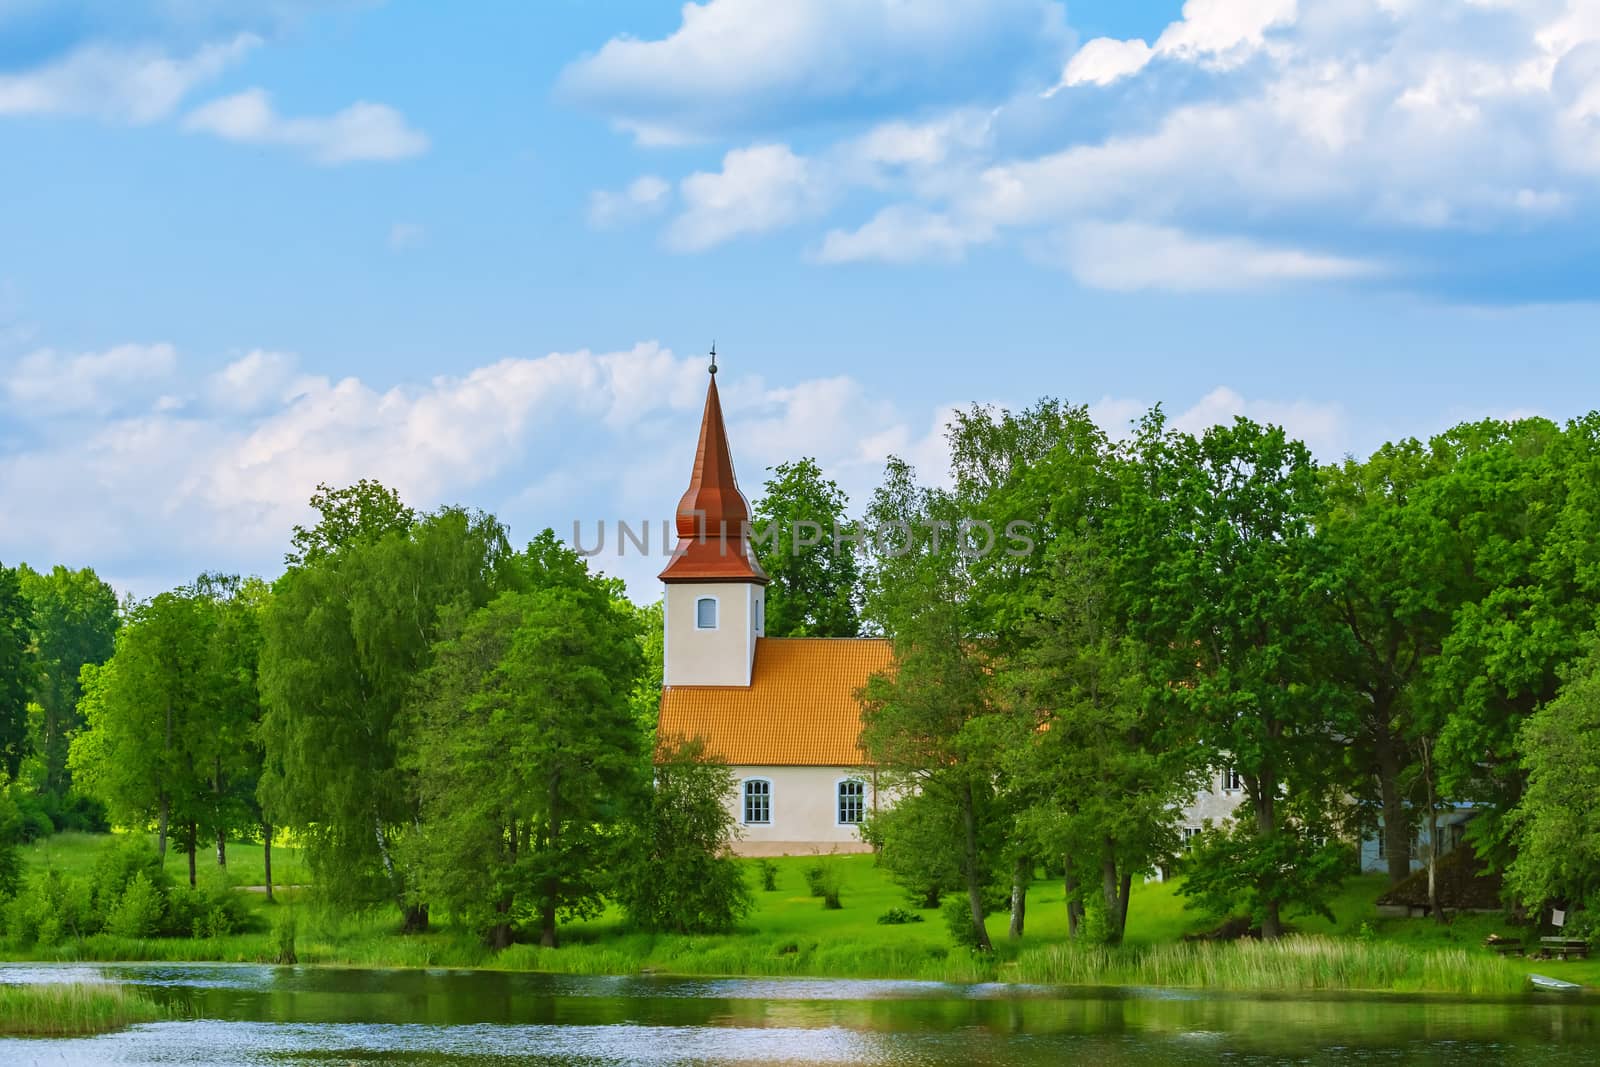 Church on the bank of the lake by SNR